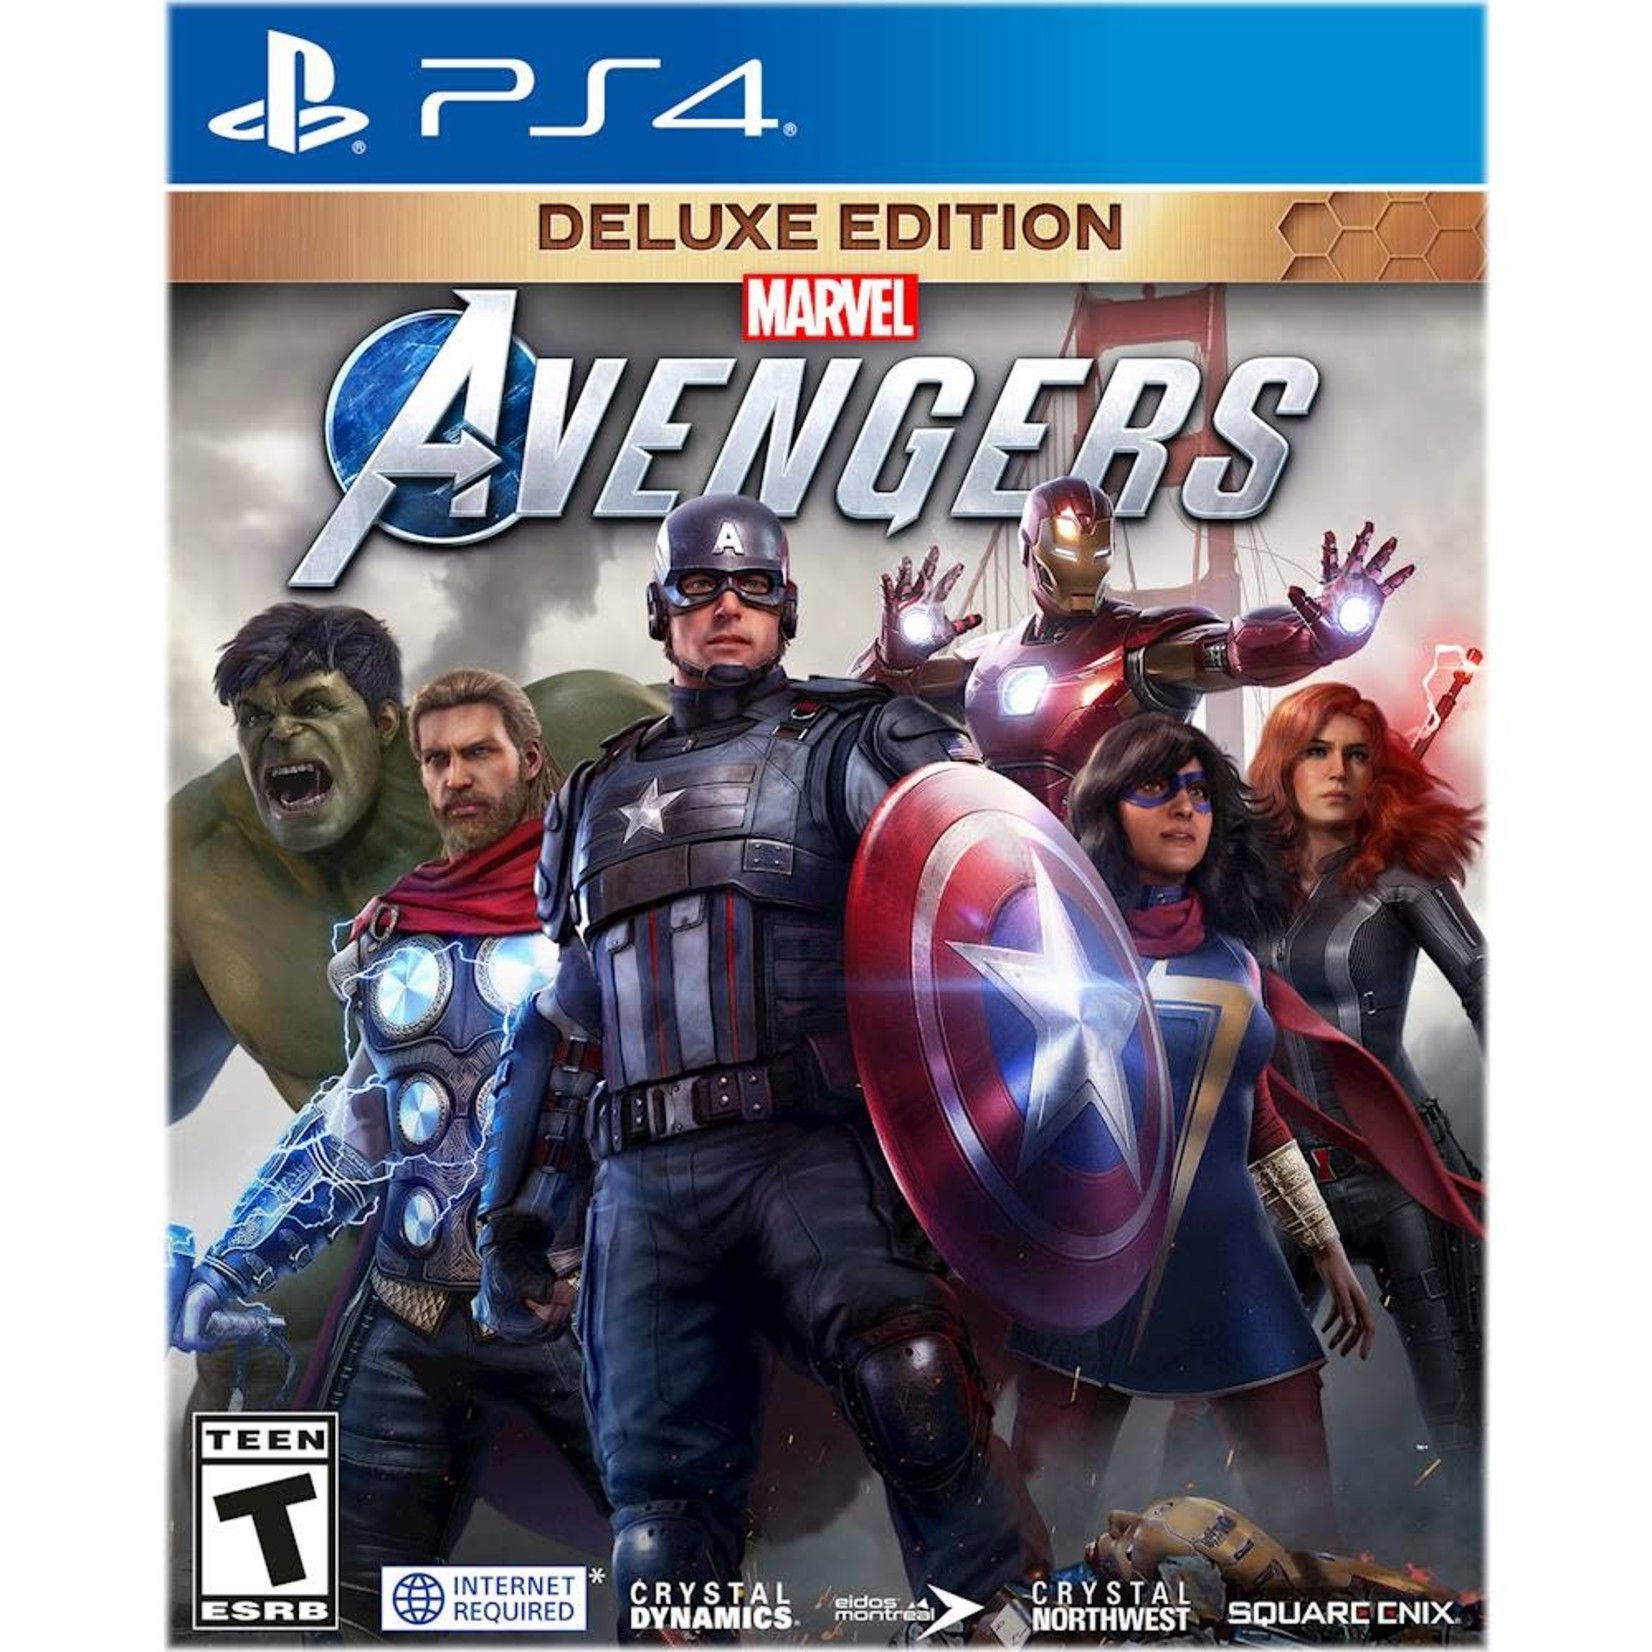 PS4-MARVEL'S AVENGERS DELUXE EDITION